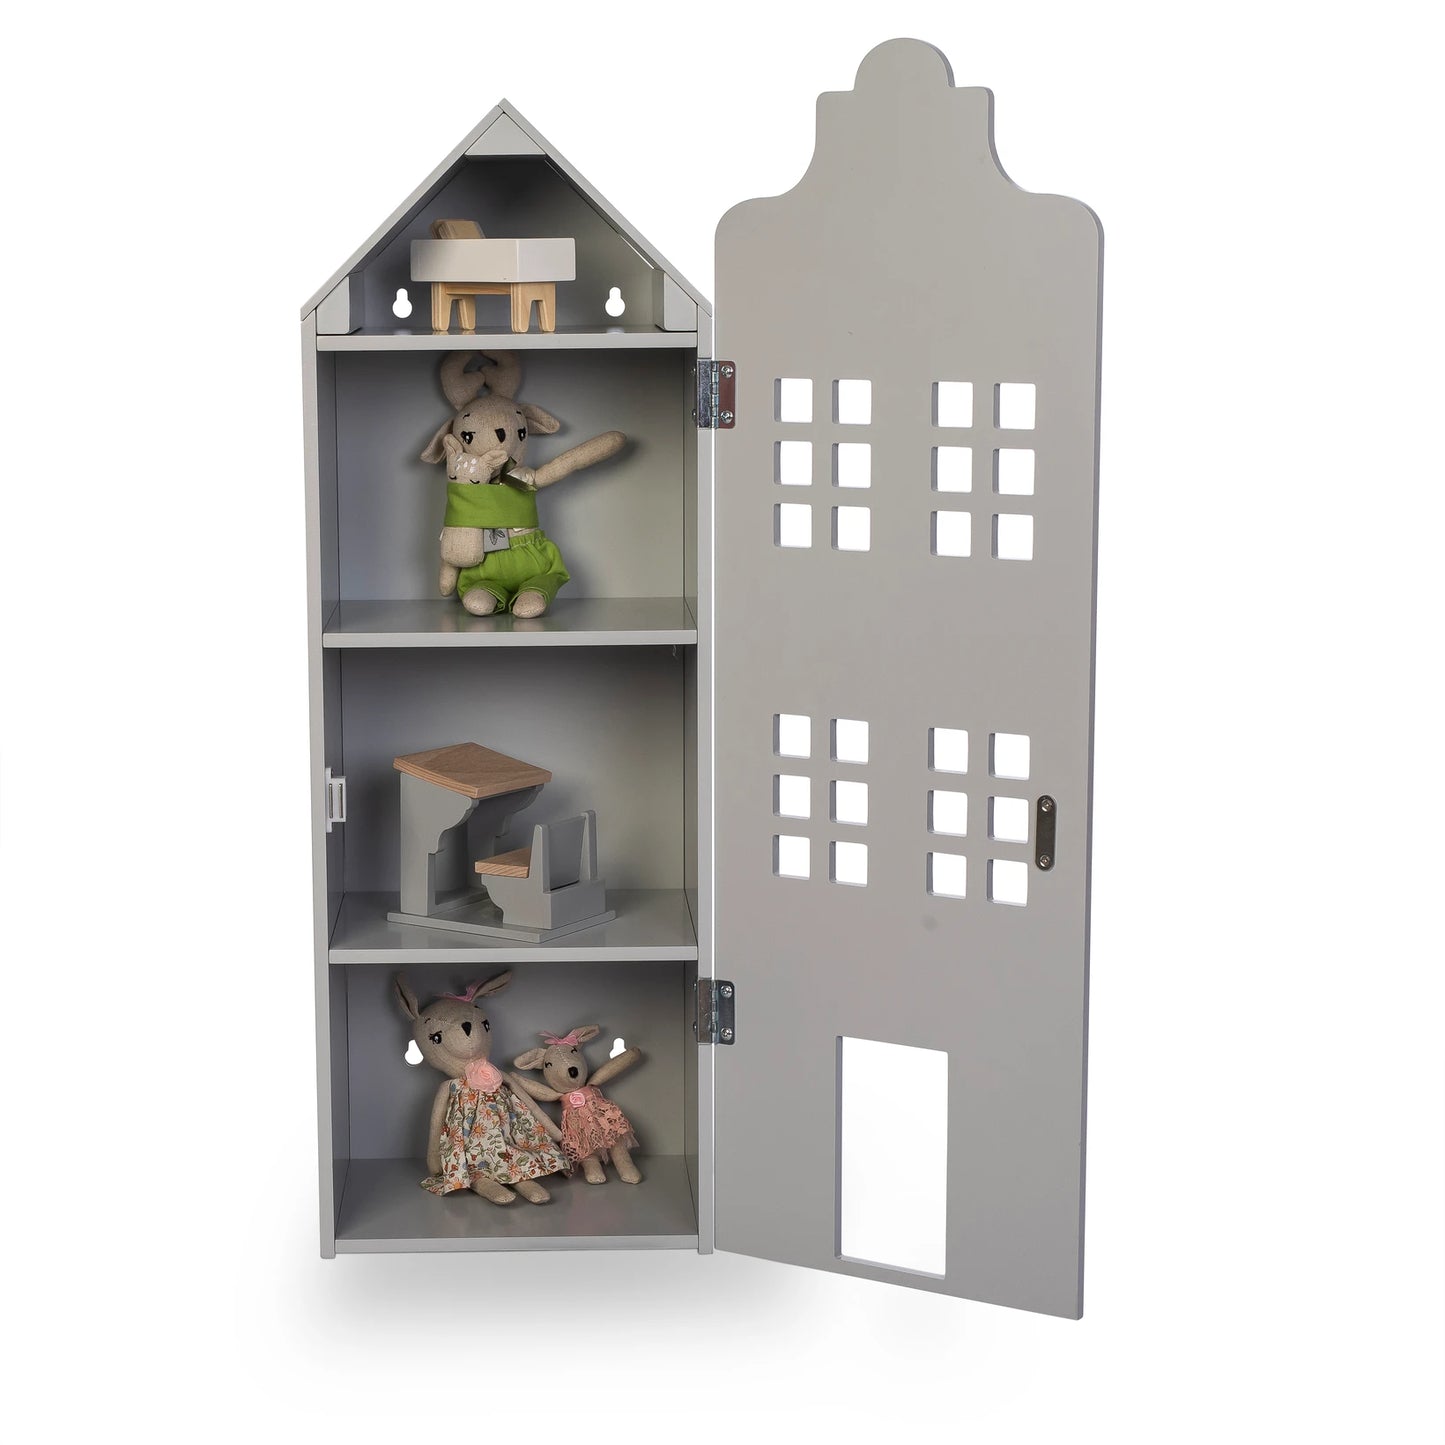 Pretend play doll town house